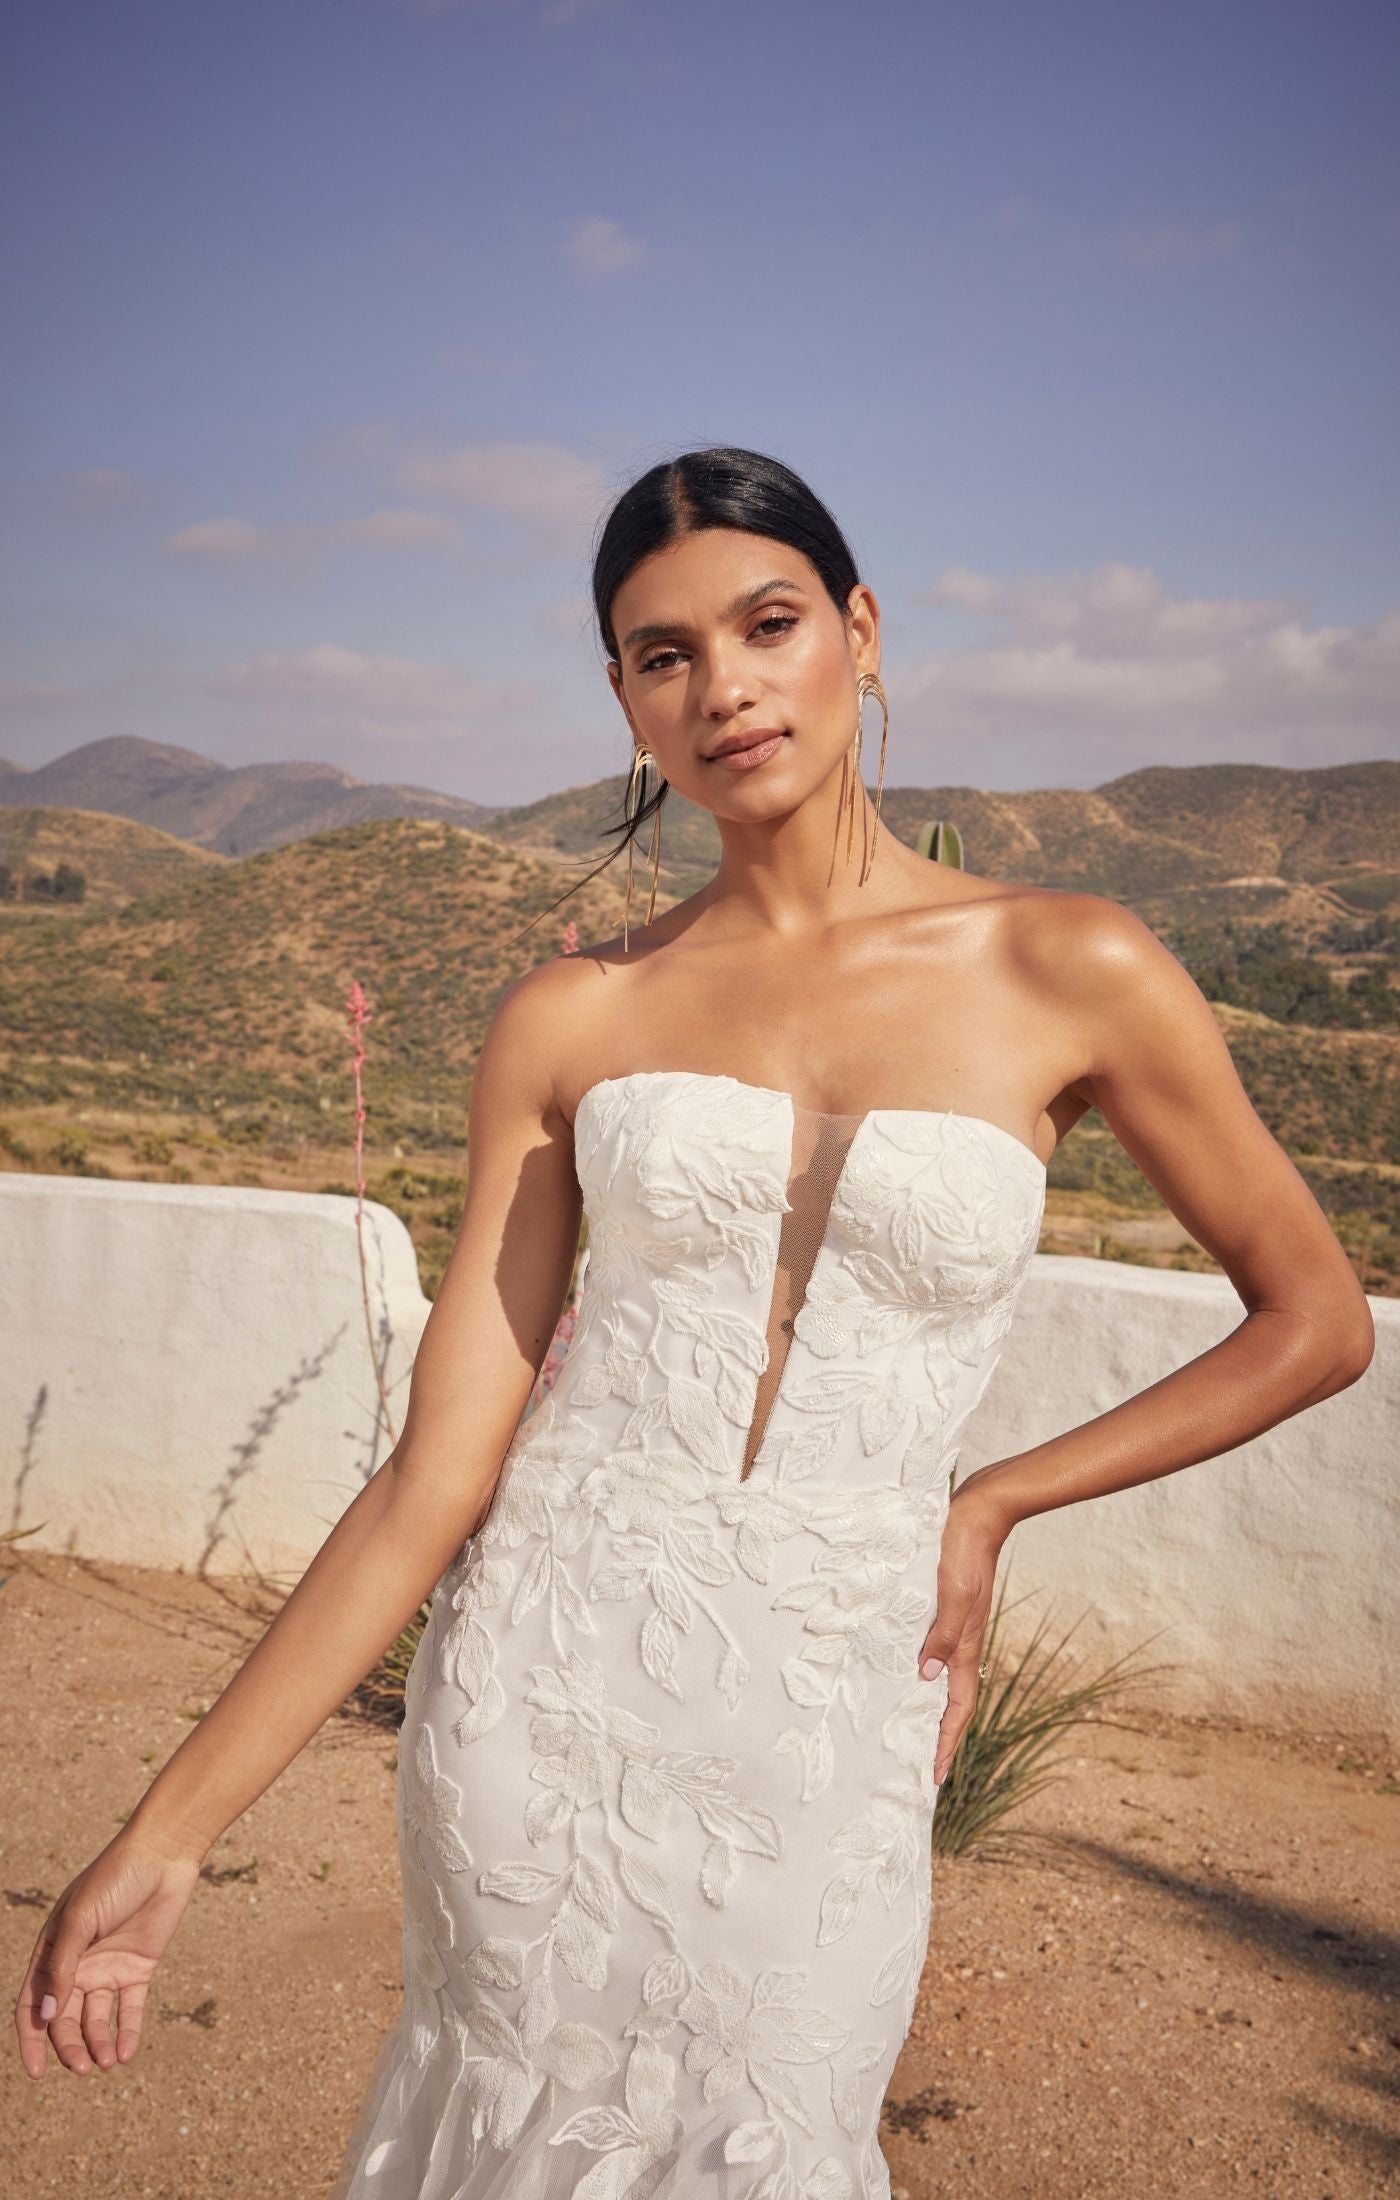 Casablanca Beloved BL432 Colt Mermaid Strapless Embroidered Sequin Floral Lace Deep V-Neck Wedding Gown. Nothing quite compares to stylish fit and flare – sophisticated, romantic and flattering, you’ll find yourself head over heels for Style BL432 Colt.